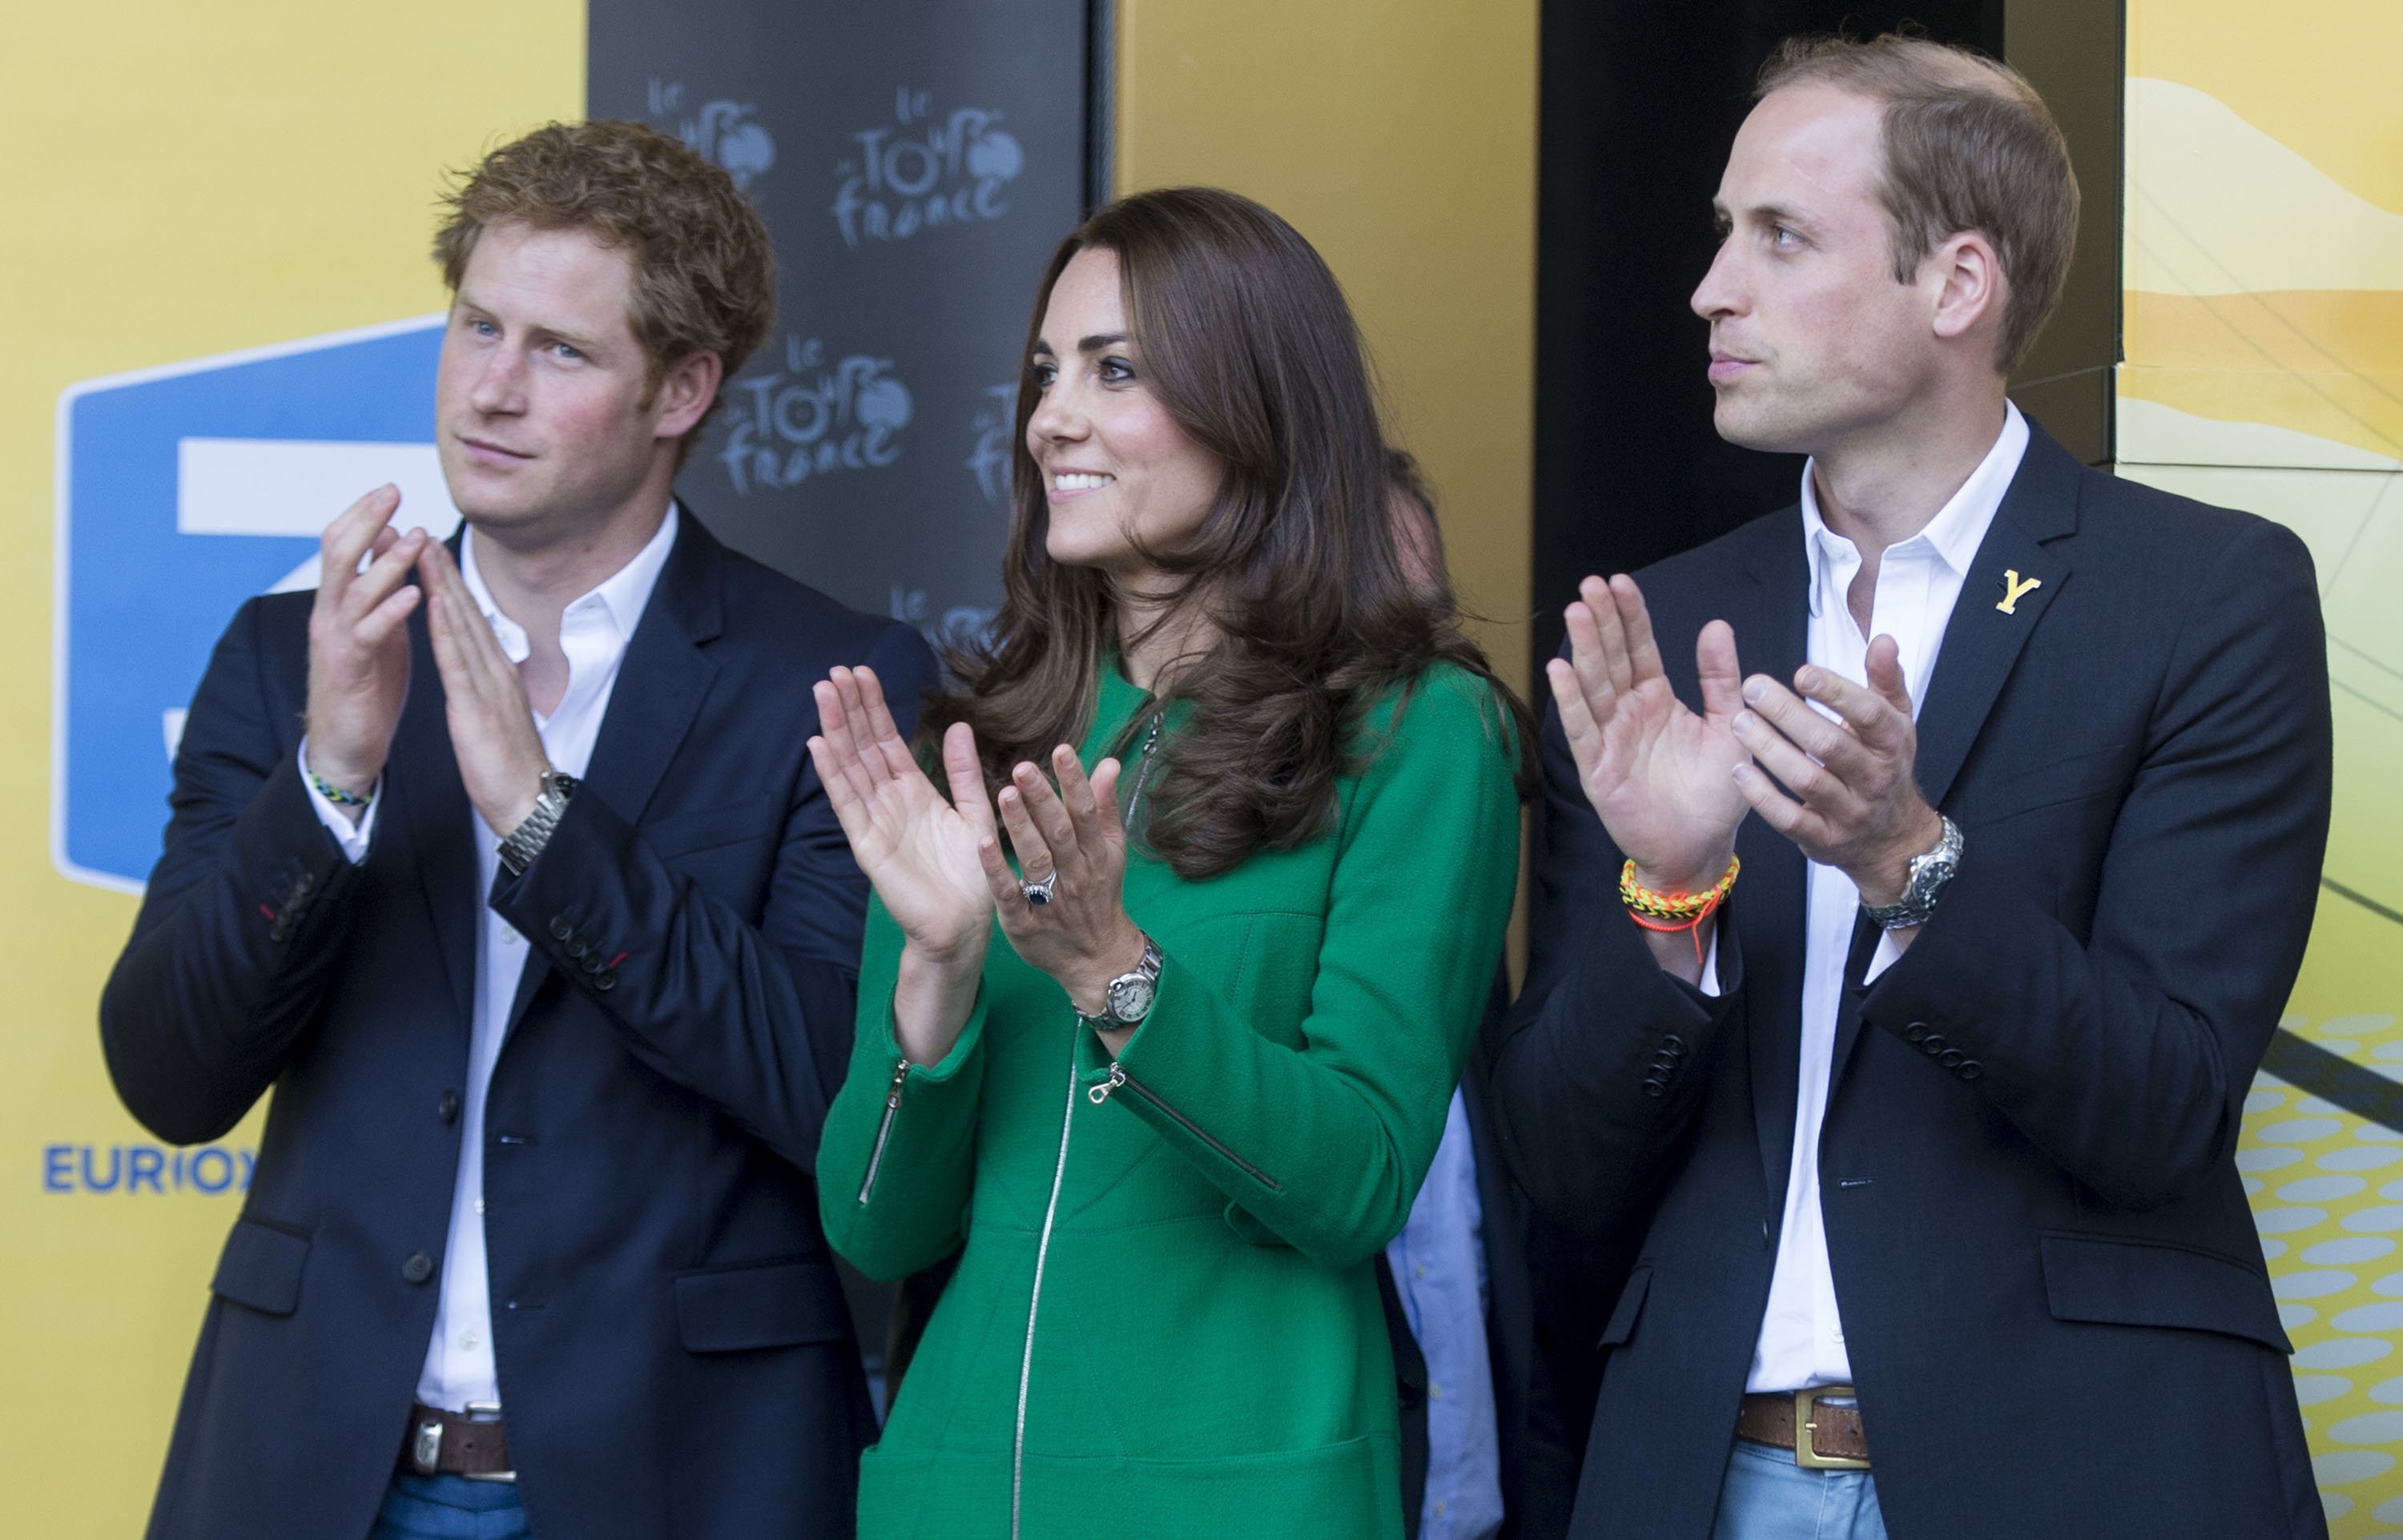  Prince William, Duke of Cambridge and Catherine, Duchess of Cambridge with Prince Harry at the finish line of stage one of The Tour de France on July 5, 2014 in Harrogate, England. | Source: Getty Images